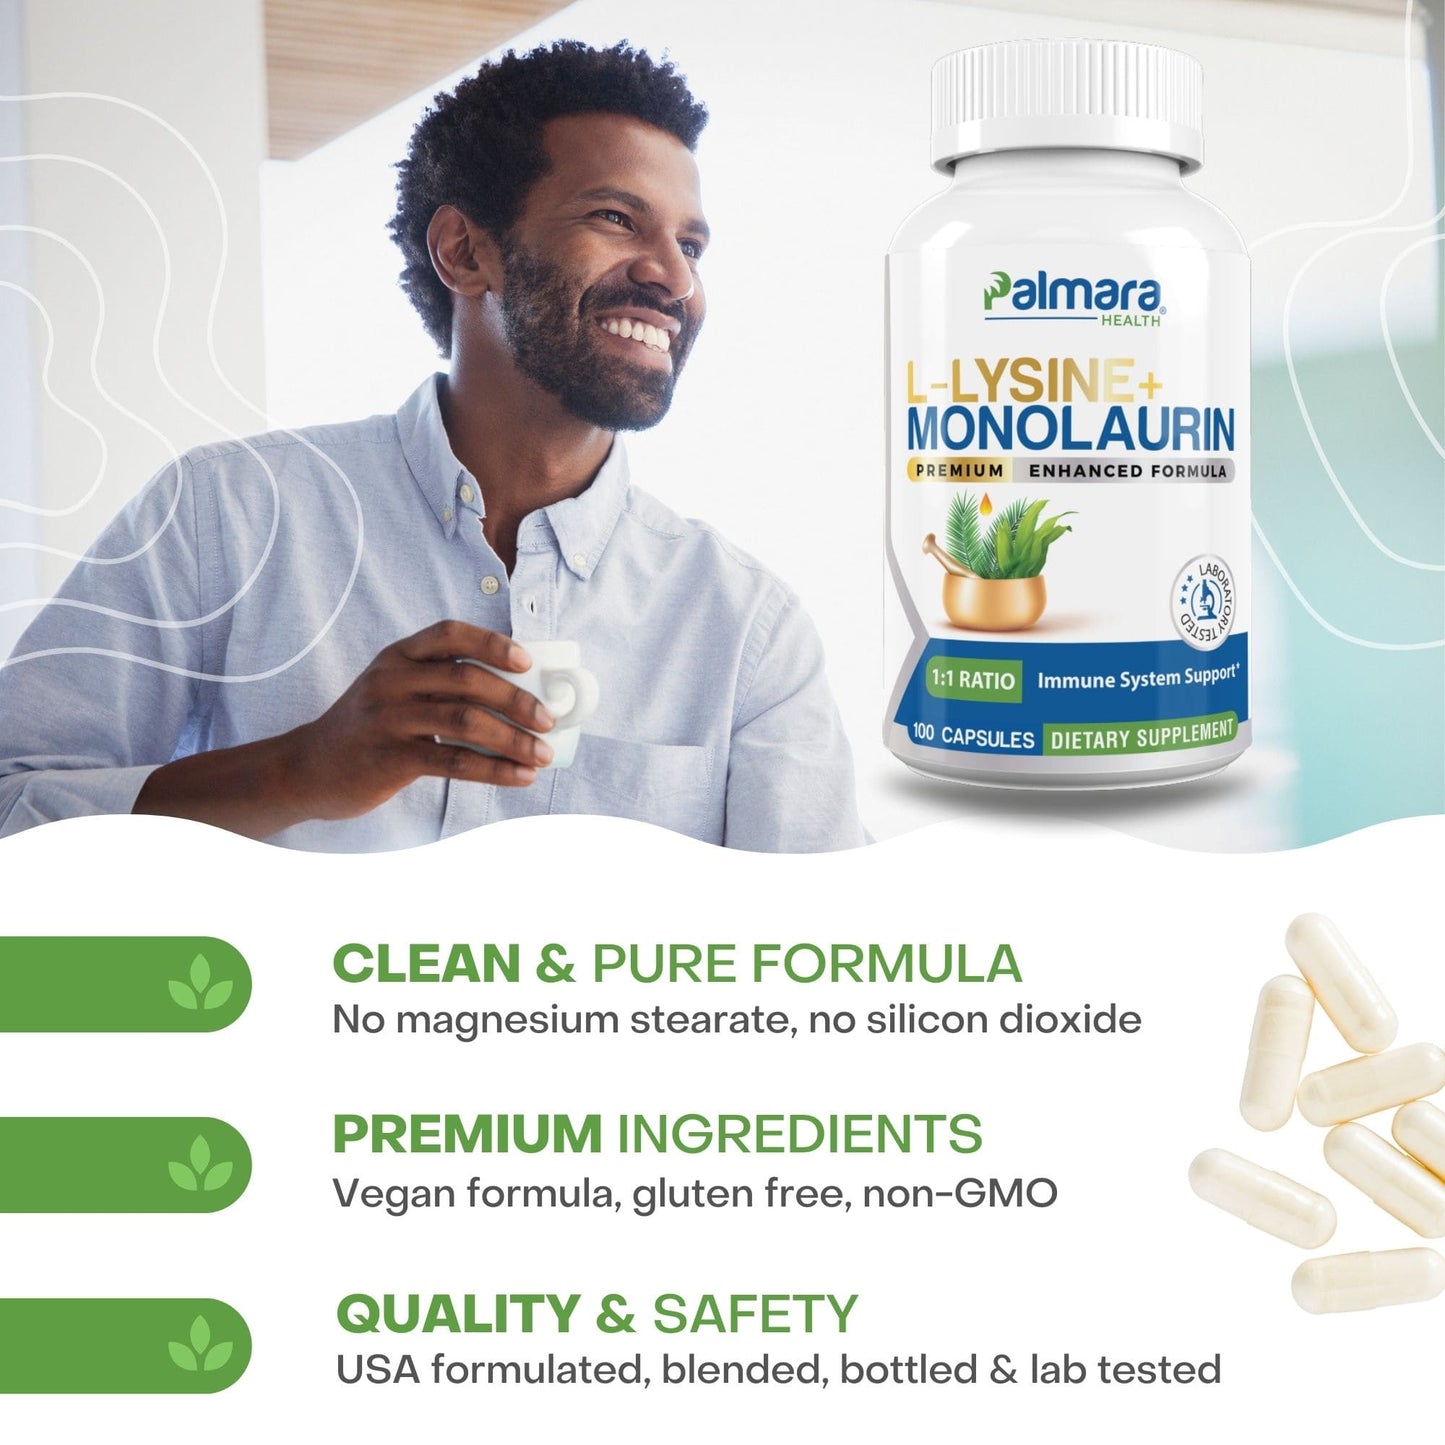 
                  
                     A content man enjoying a healthy lifestyle with a bottle of Palmara Health L-Lysine + Monolaurin, emphasizing the monolaurin benefits for well-being along with a pure and clean supplement formula.
                  
                